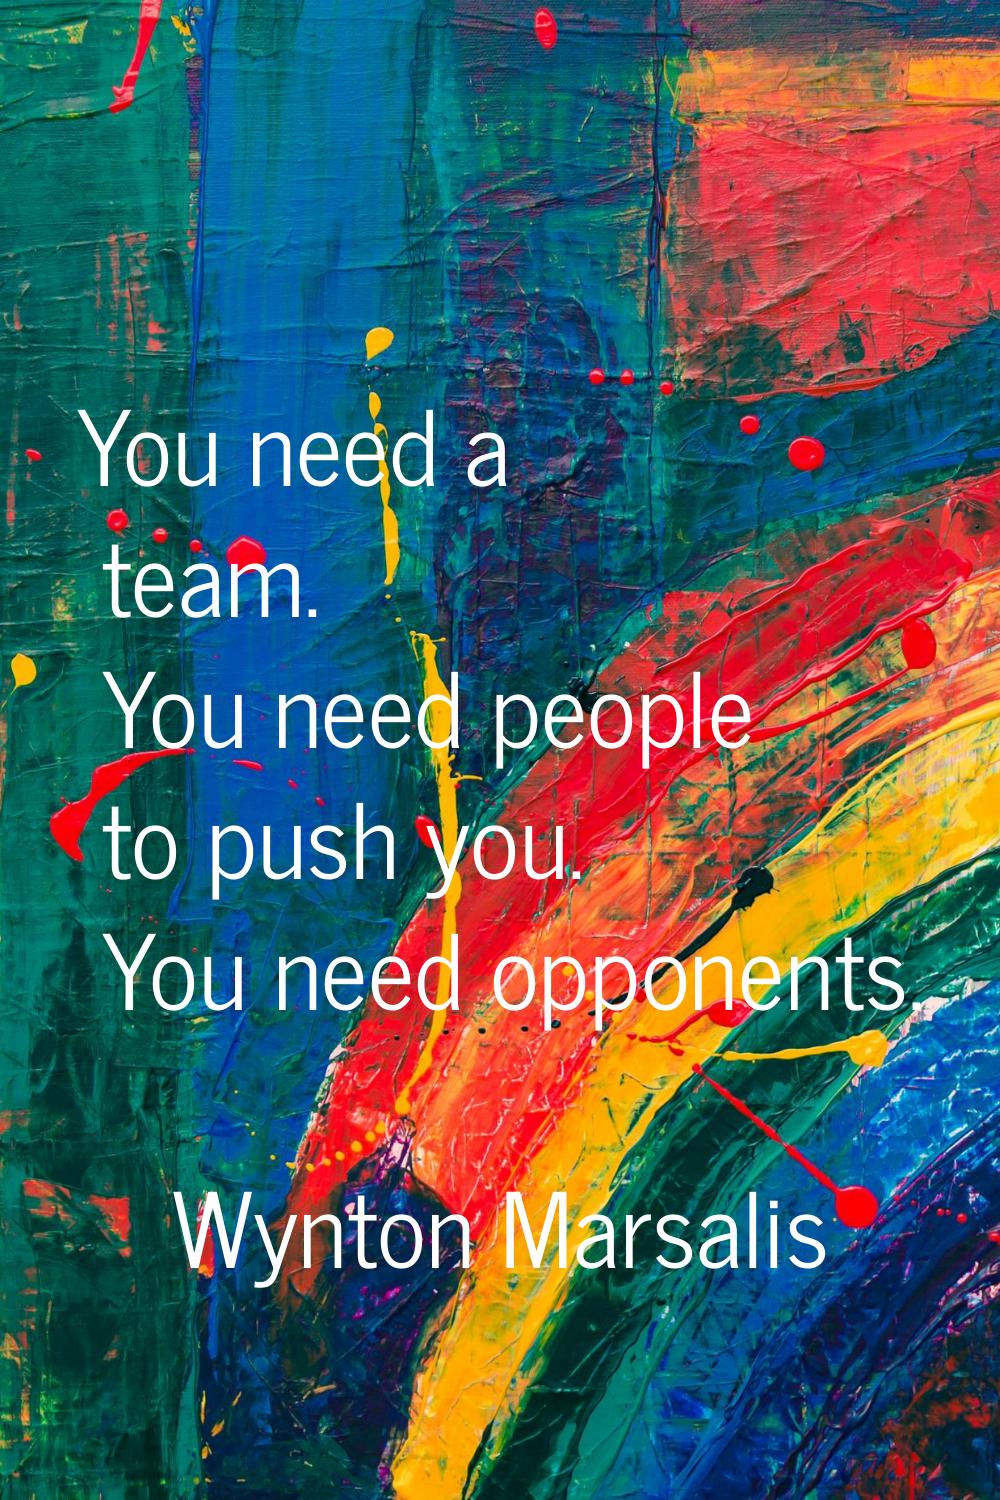 You need a team. You need people to push you. You need opponents.